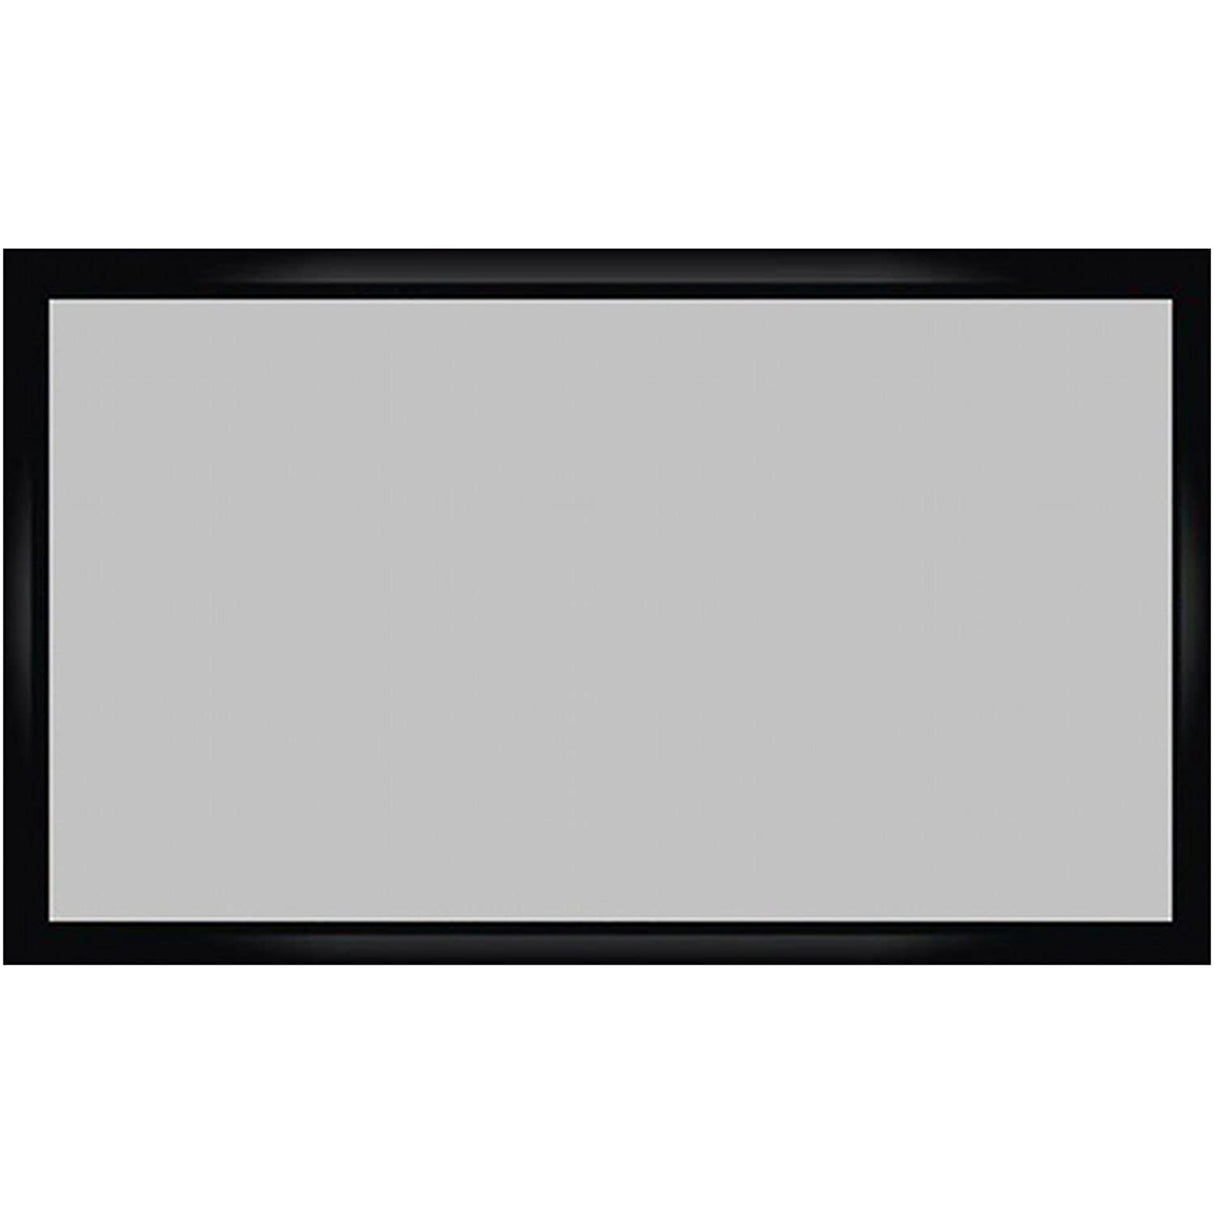 Prime Eco-line Grey Fabric Ambient Light Rejection (ALR) Flat Fixed Frame Projection Screen 240" (For Long Throw Projectors)